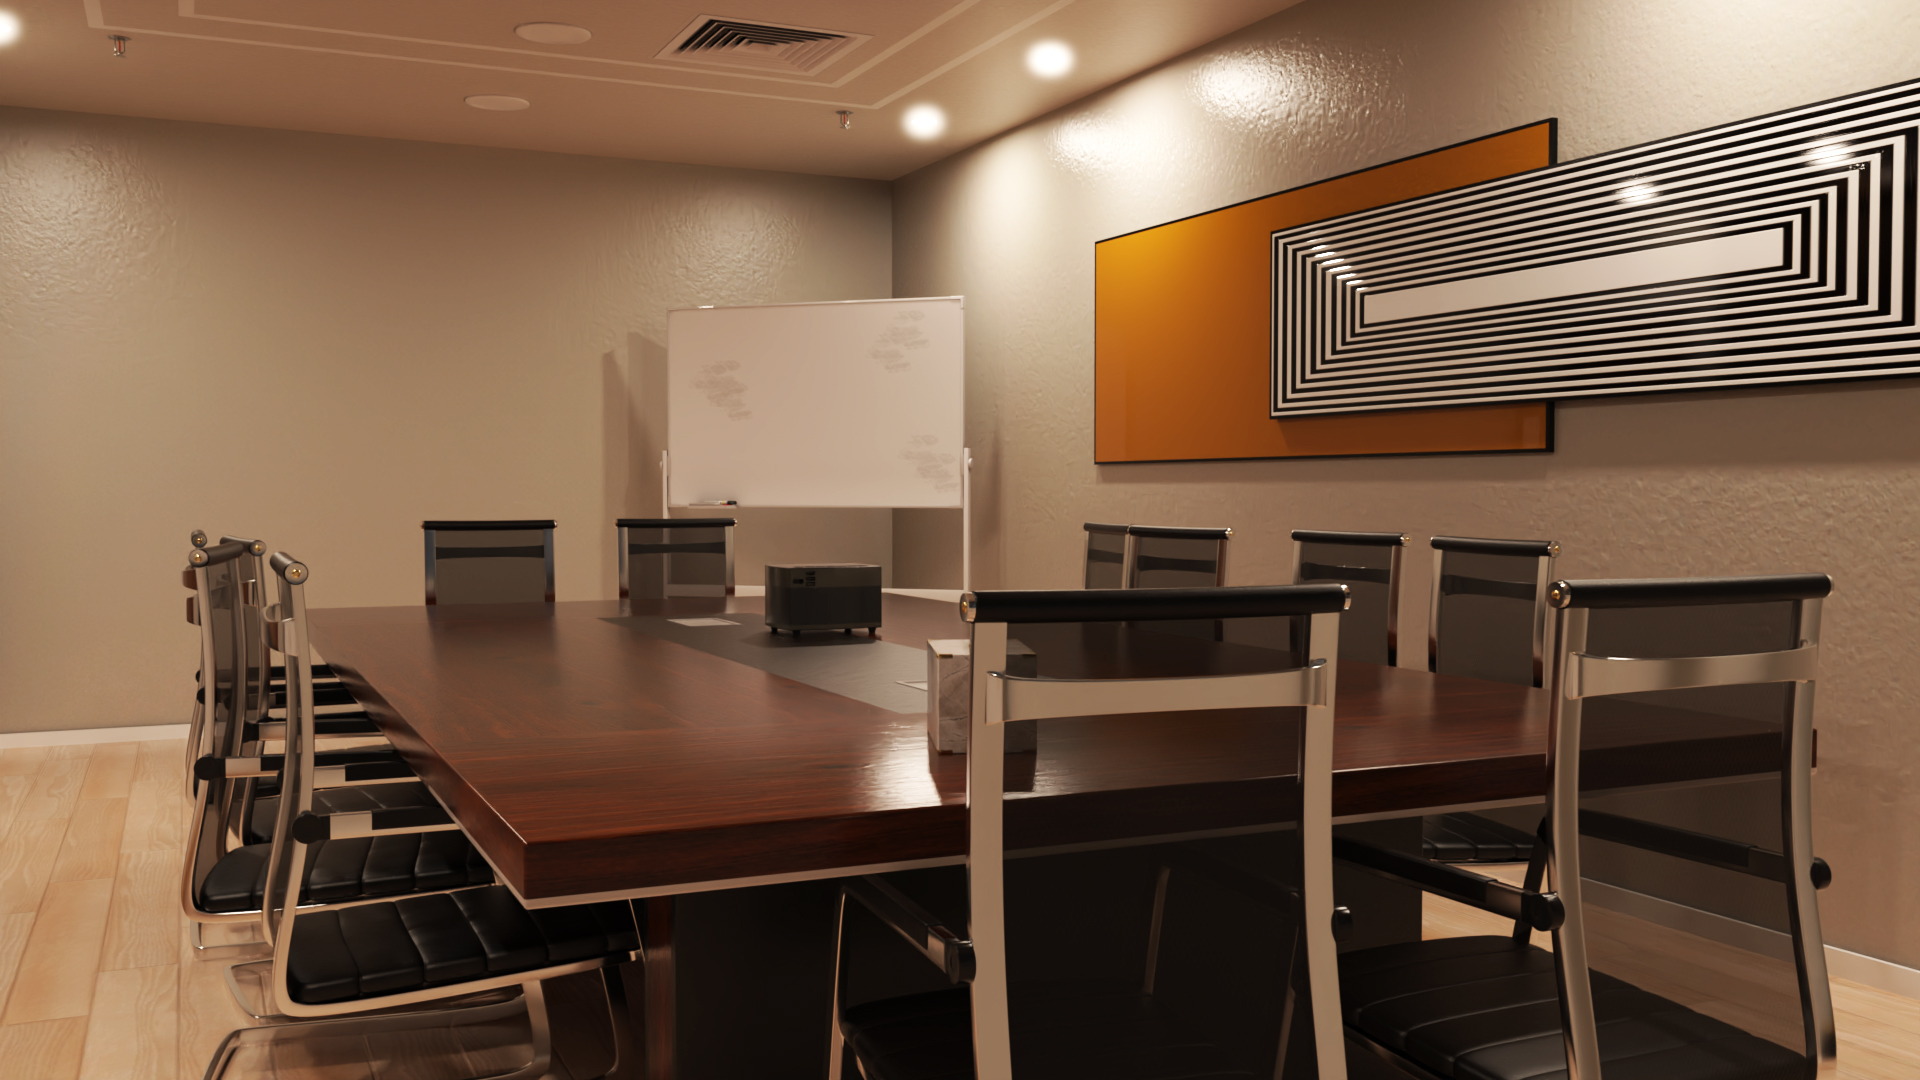 Marina Conference Room by: Tesla3dCorp, 3D Models by Daz 3D